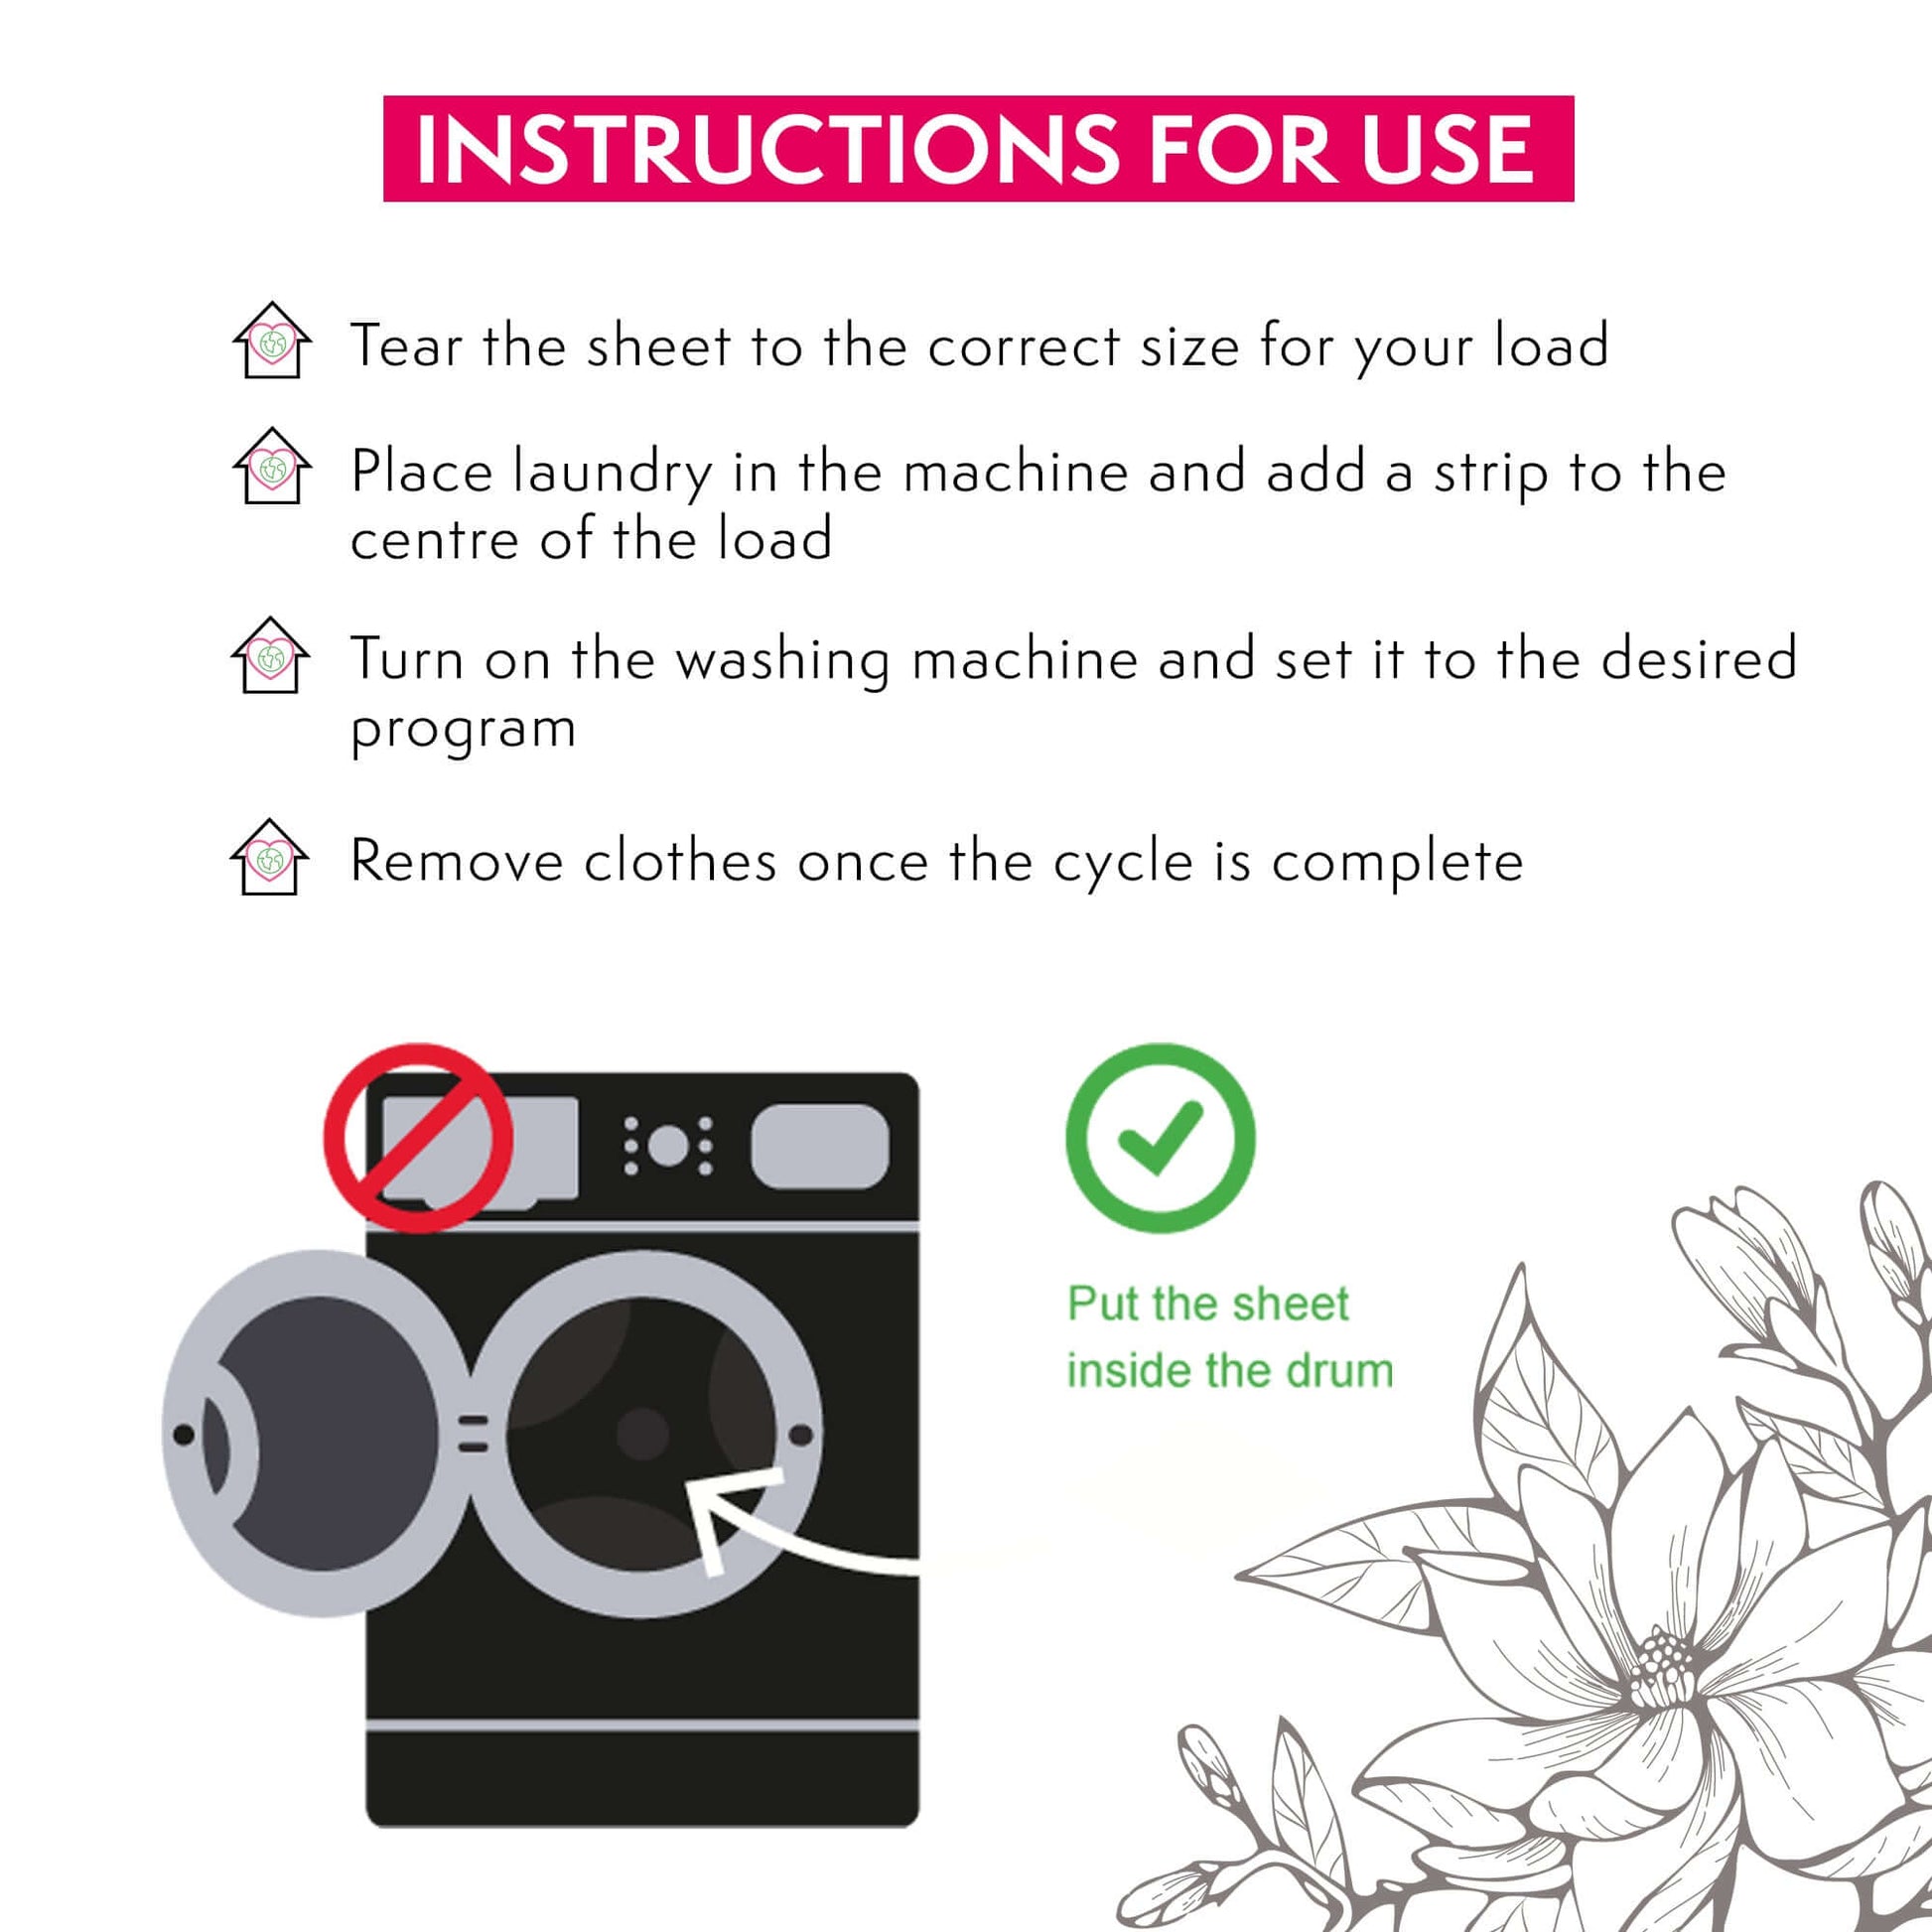 Eco-Ergent Laundry Sheets (Fragrance Free) Instructions for Use